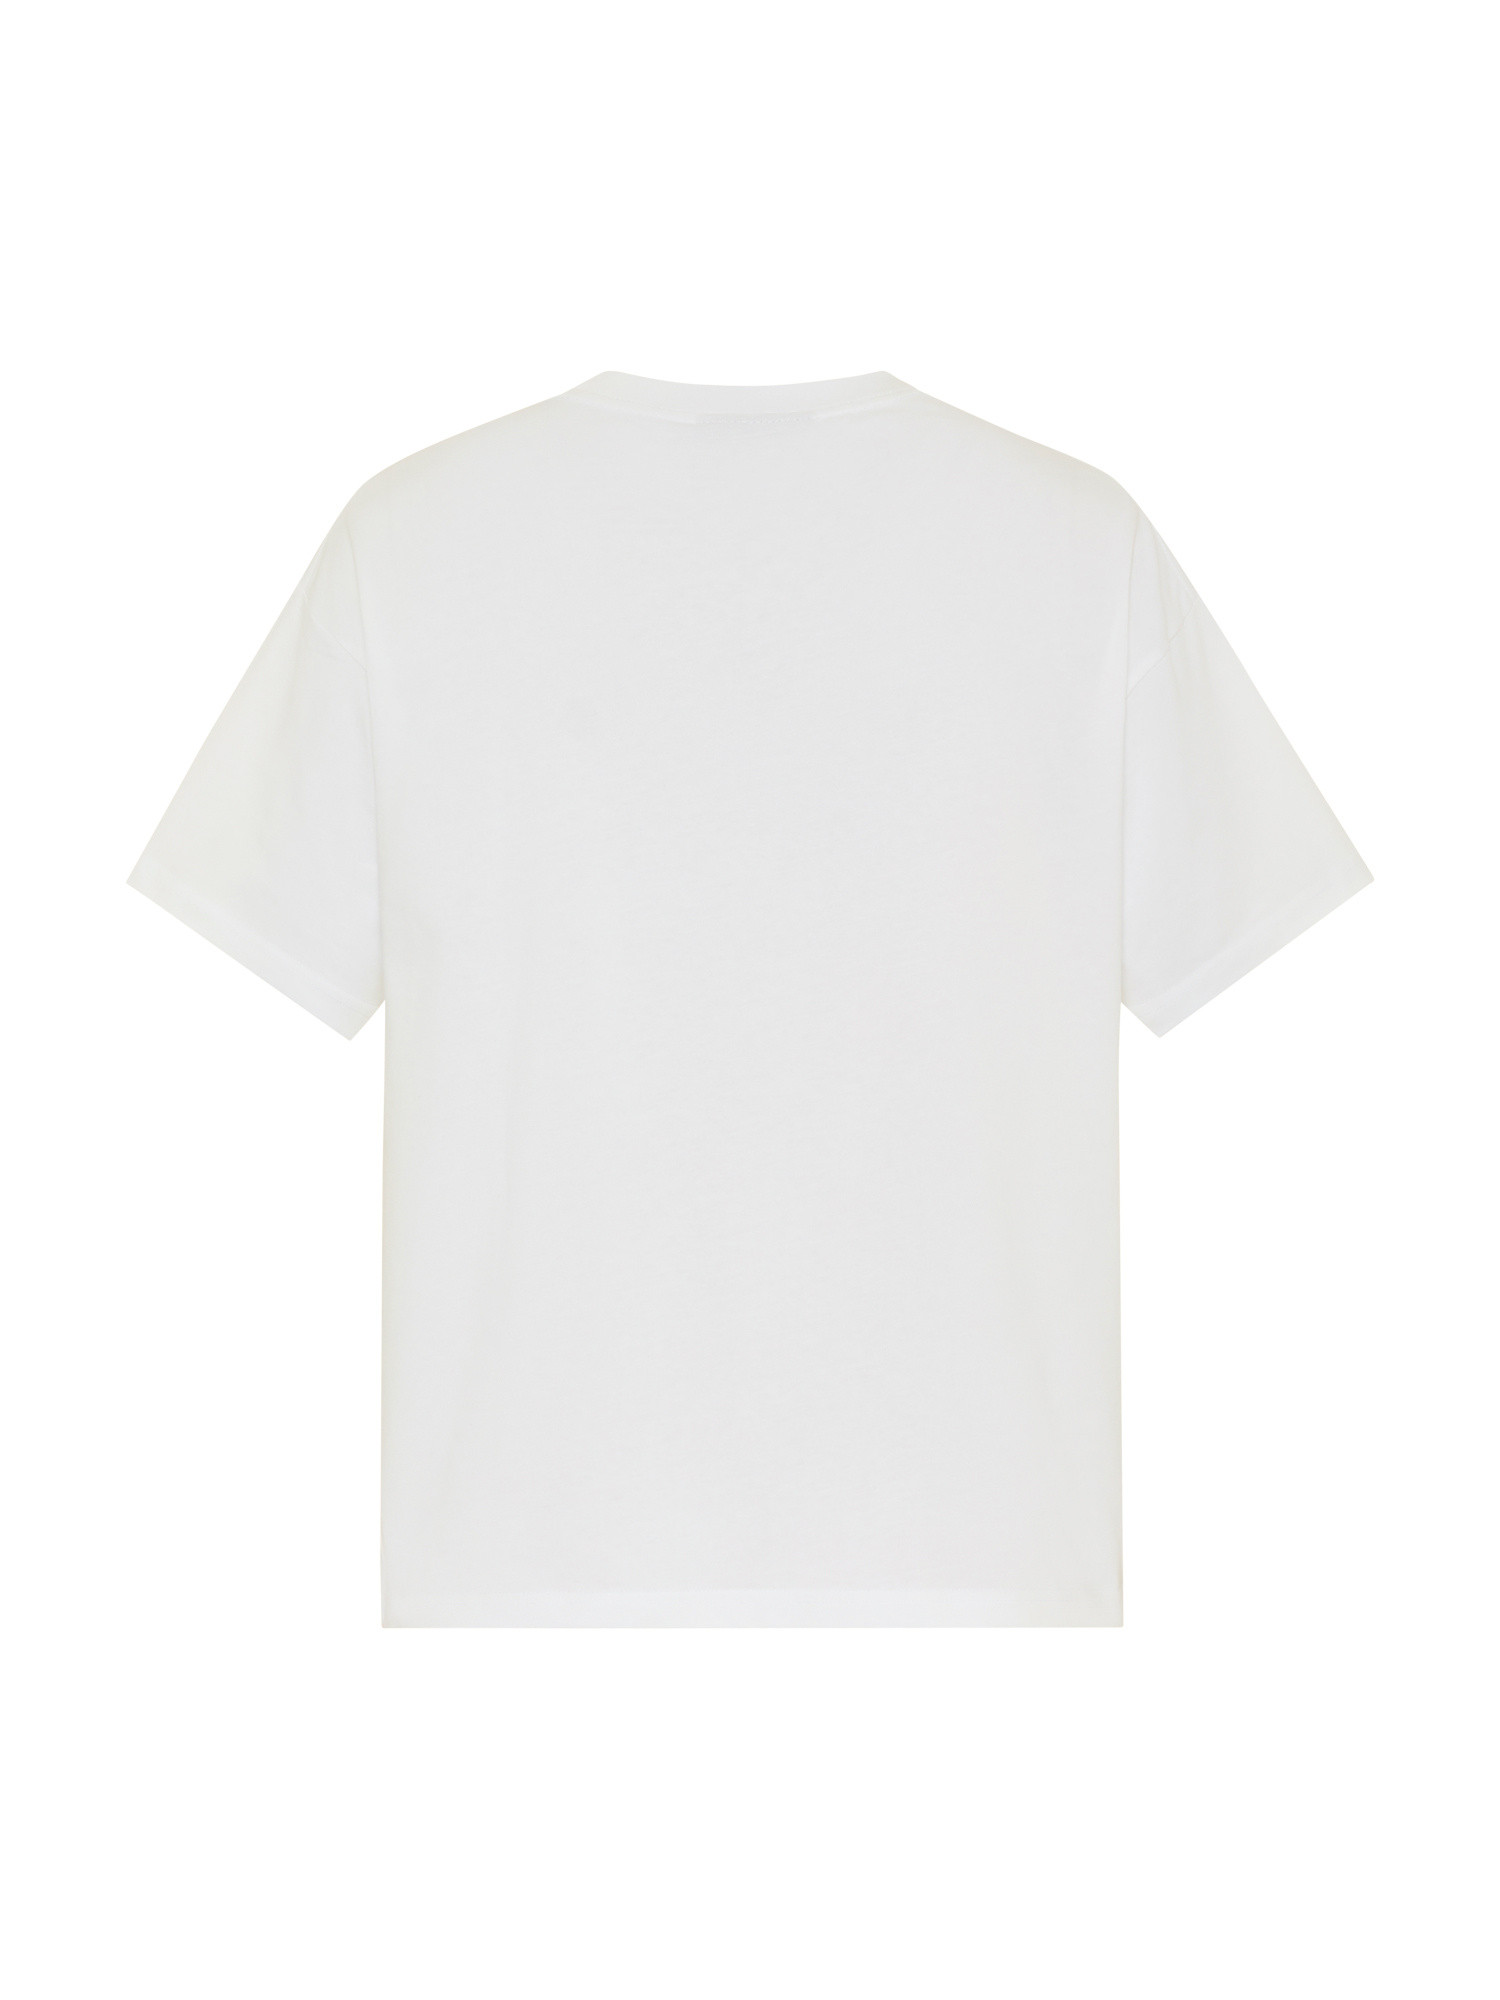 Usual - T-Shirt manica corta About, Bianco, large image number 1